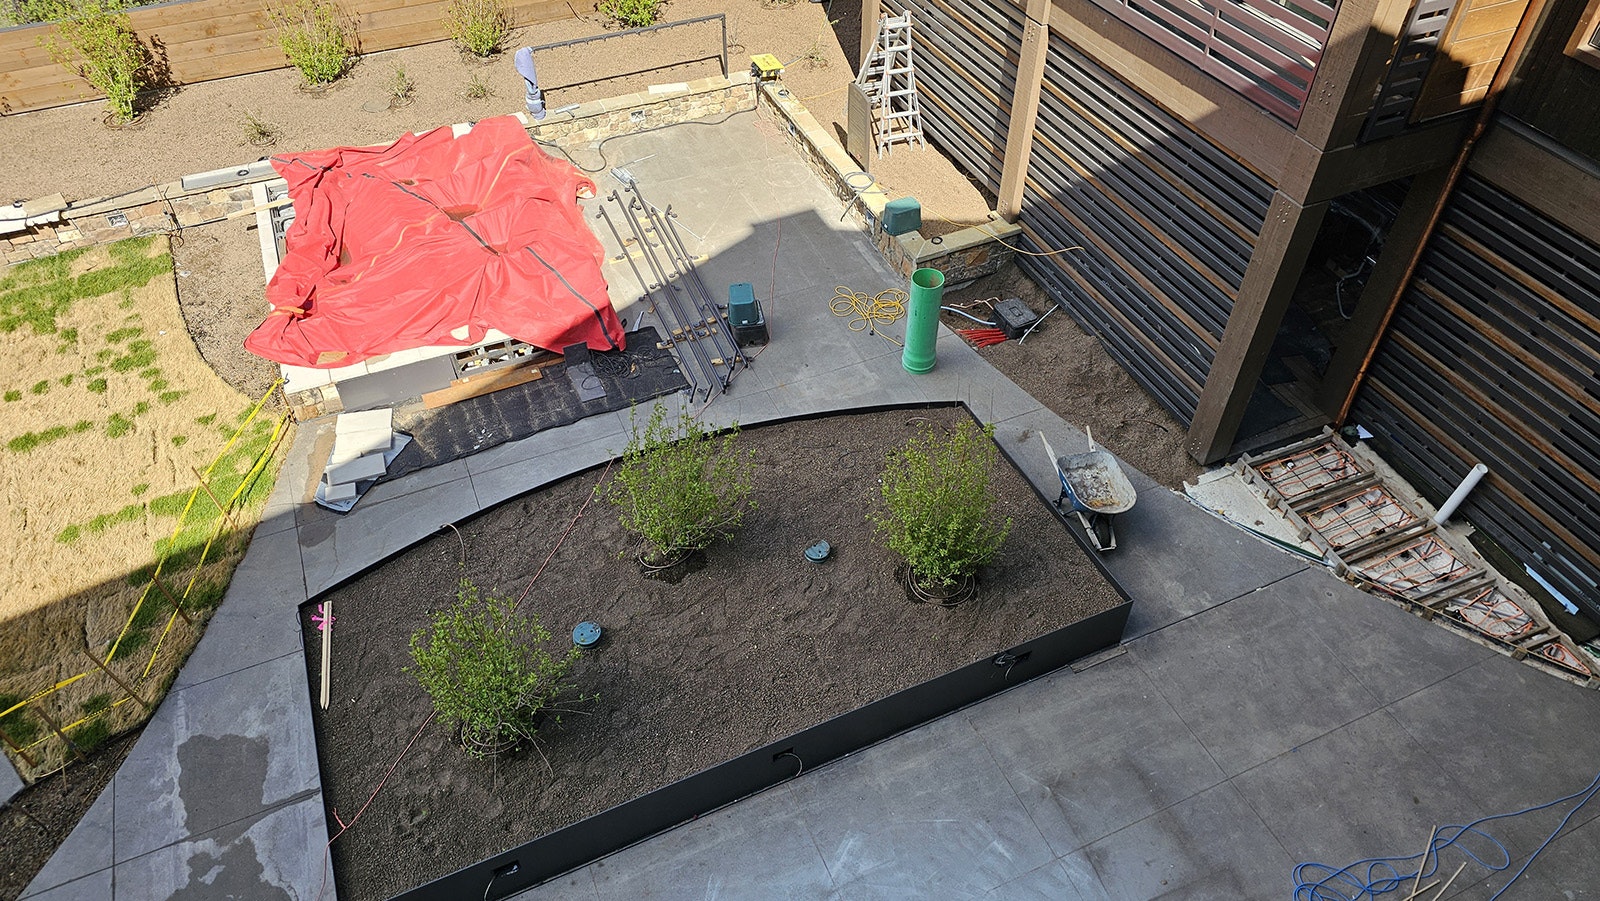 A hottub, covered with the red tarp, in the back of the courtyard will be screened by trees planted in front.